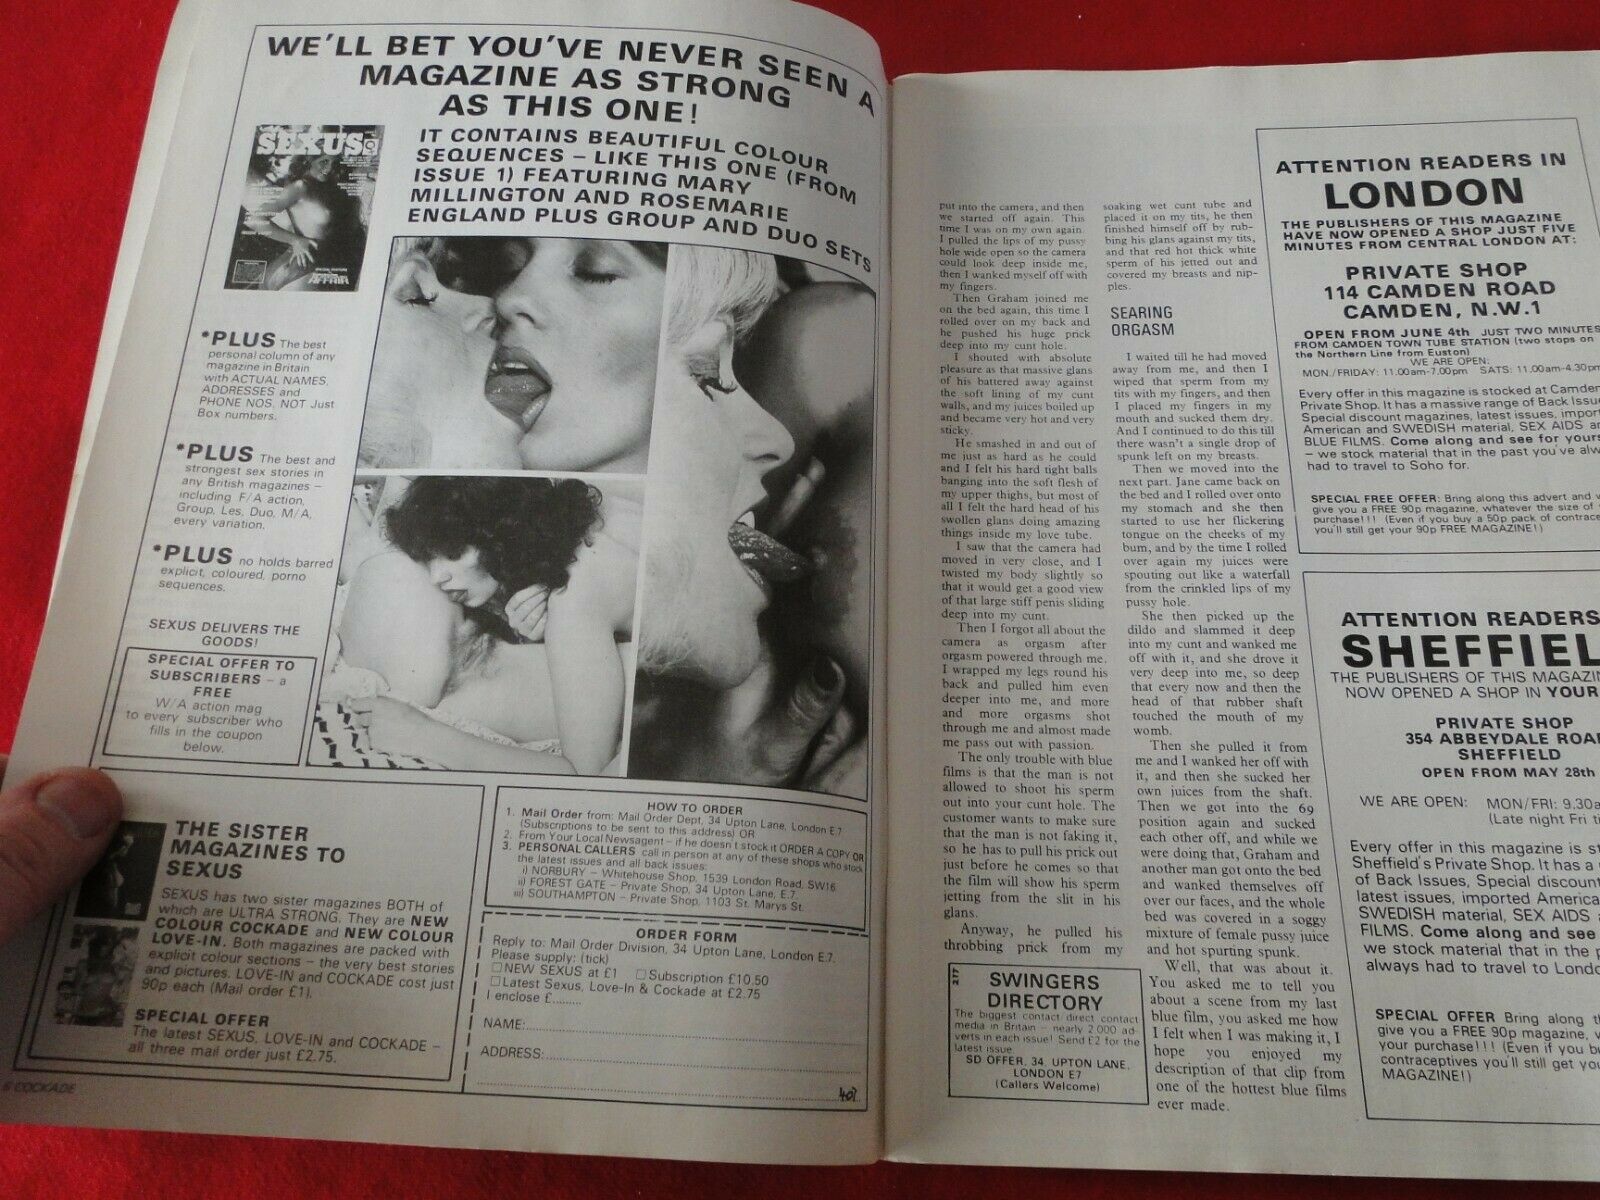 Discreet Retail - Adult Magazines - Classic Vintage Back Issues